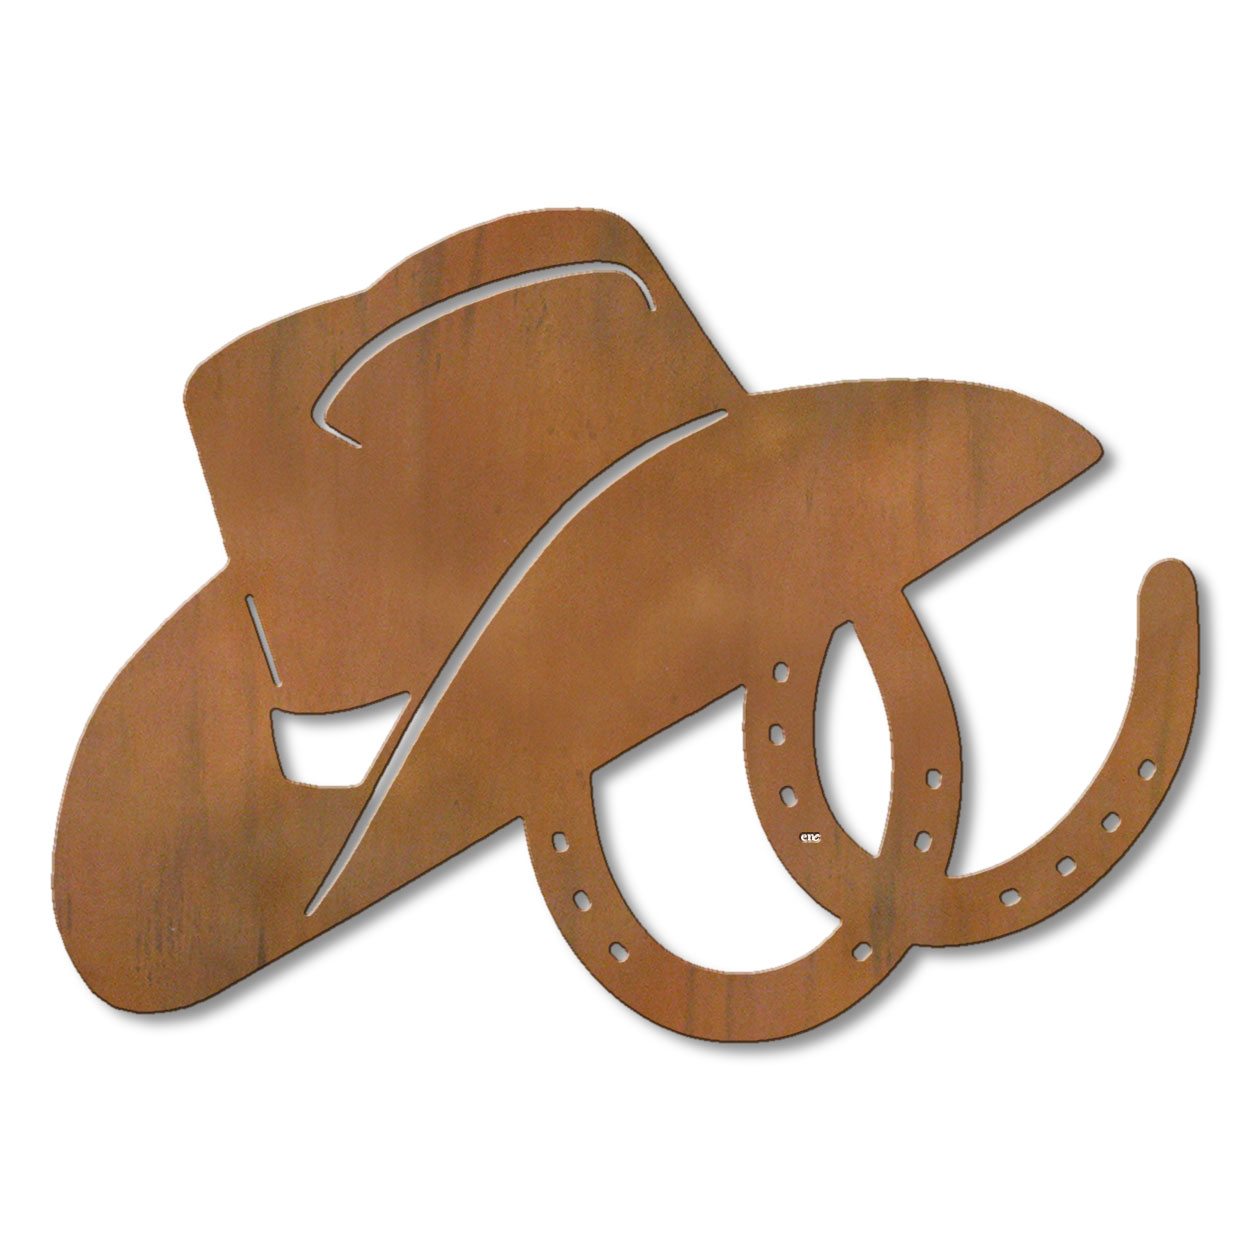 625016r - 18 or 24in Metal Wall Art - Hat And Horseshoes - Rust